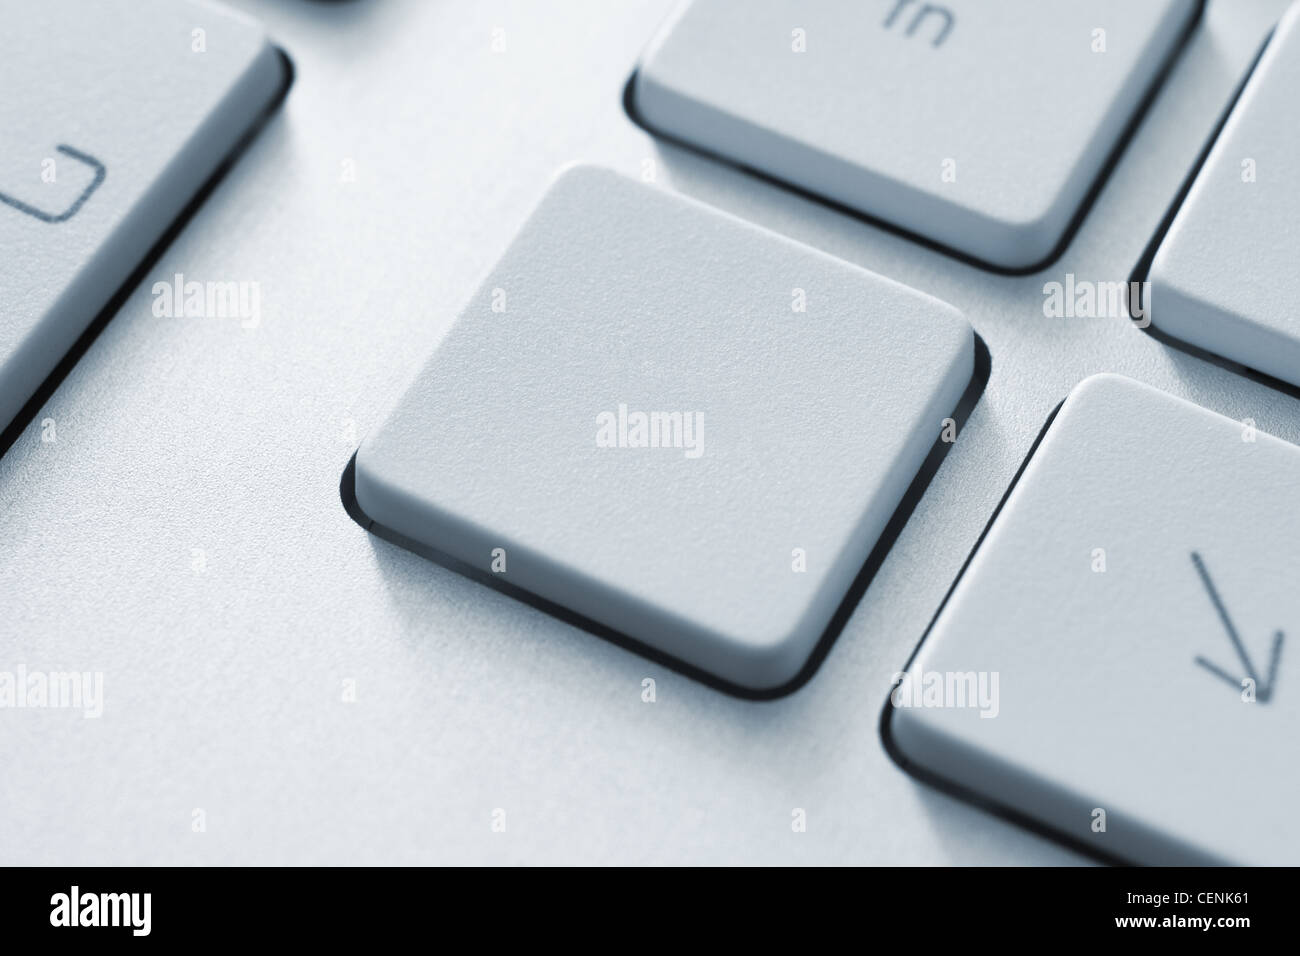 Blank button on the keyboard. Toned Image. Stock Photo